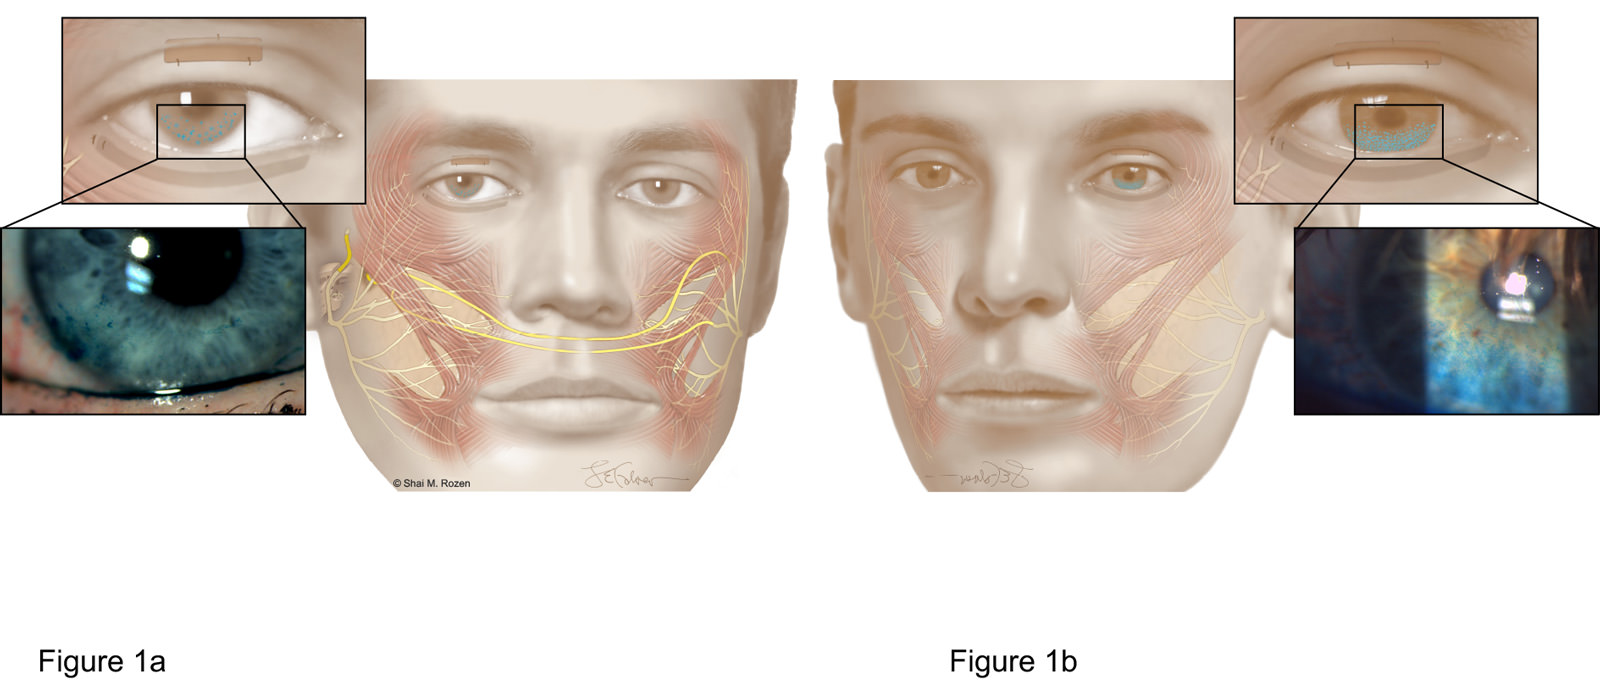 Dr. Rozen and his team compared the corneal integrity and ability to close the eyelids between 2 treatment groups. Figure 1a depicts patients who underwent dynamic reanimation of the eyelids with renervation techniques. Figure 1b depicts patients who could only undergo passive techniques for eye protection. Patients who underwent dynamic reanimation with renervation techniques (Figure 1a) had more corneal protection and improved eye closure in long-term follow-ups.